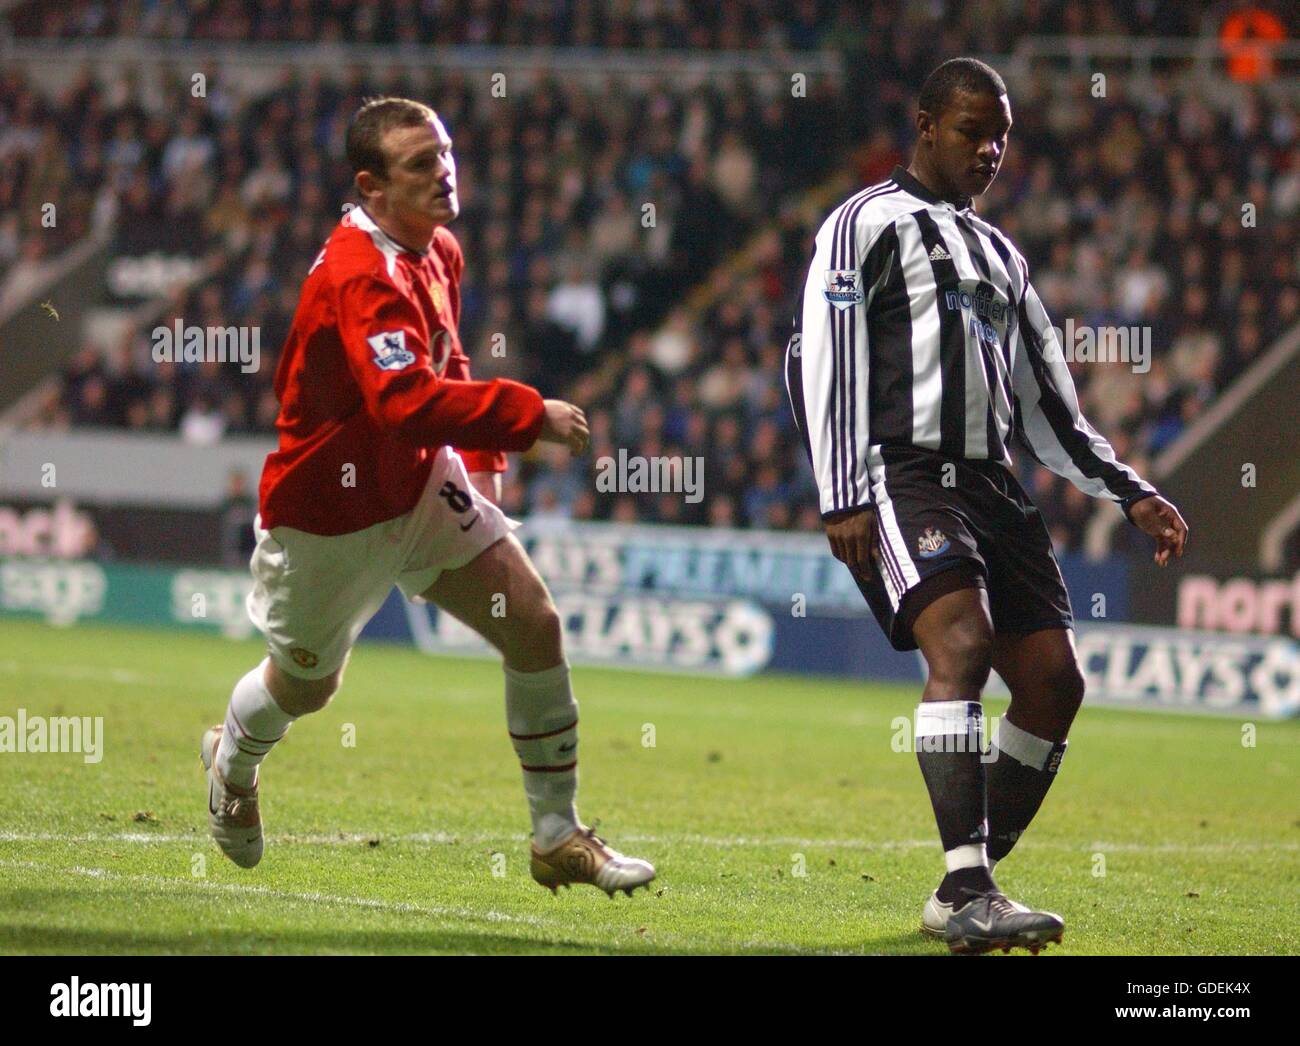 Newcastle United's Titus Bramble looks on dejected as Manchester United's Wayne Rooney turns away to celebrate after scoring their opening goal Stock Photo